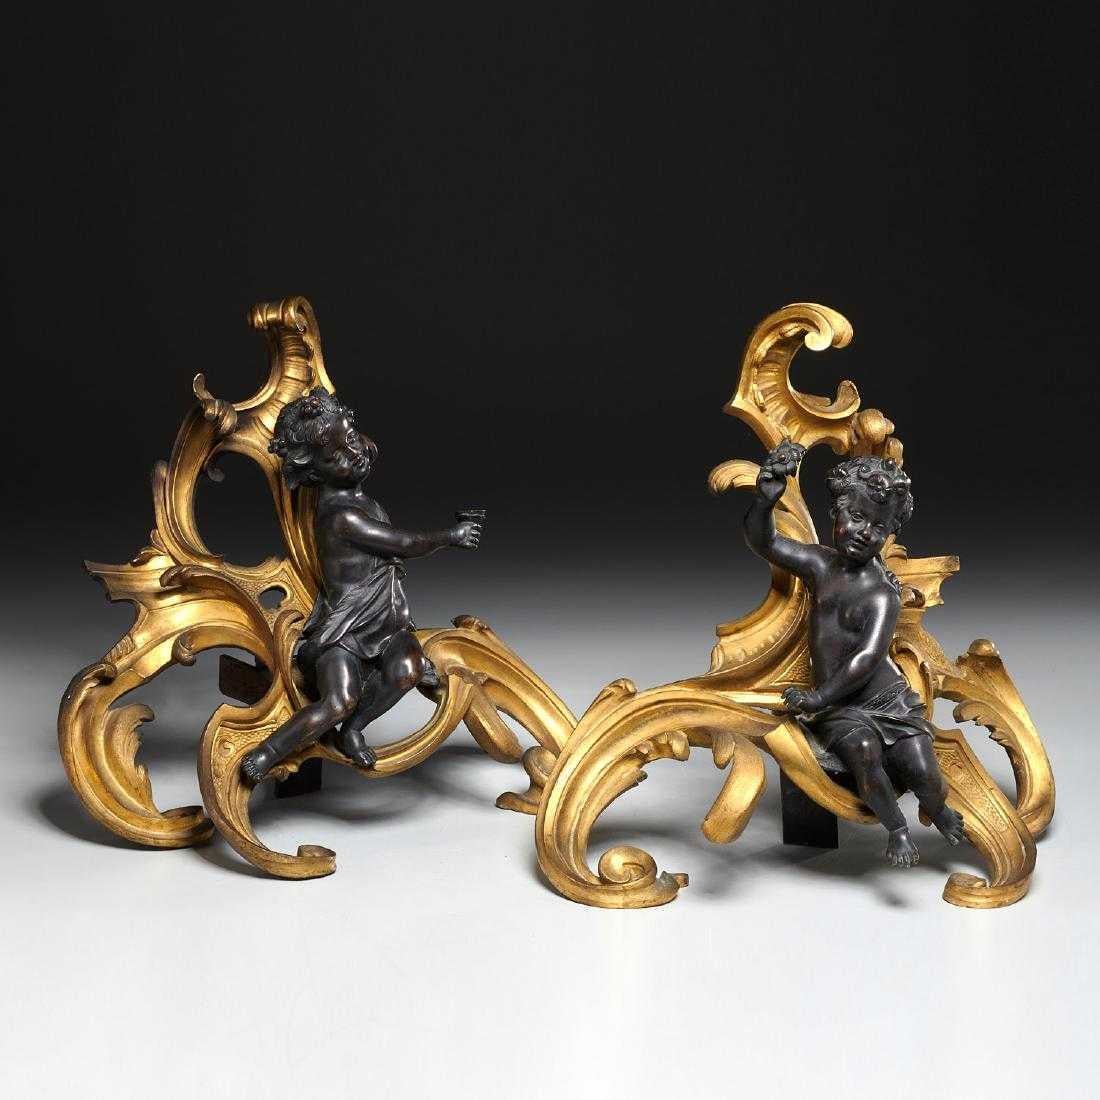 Fine pair of Baroque Bronze and ormolu Louis XV style French Chenêts depicting two putti in dark bronze patina sitting amidst a flamboyant décor of gilt ormolu rocaille. modeled after Clodion.